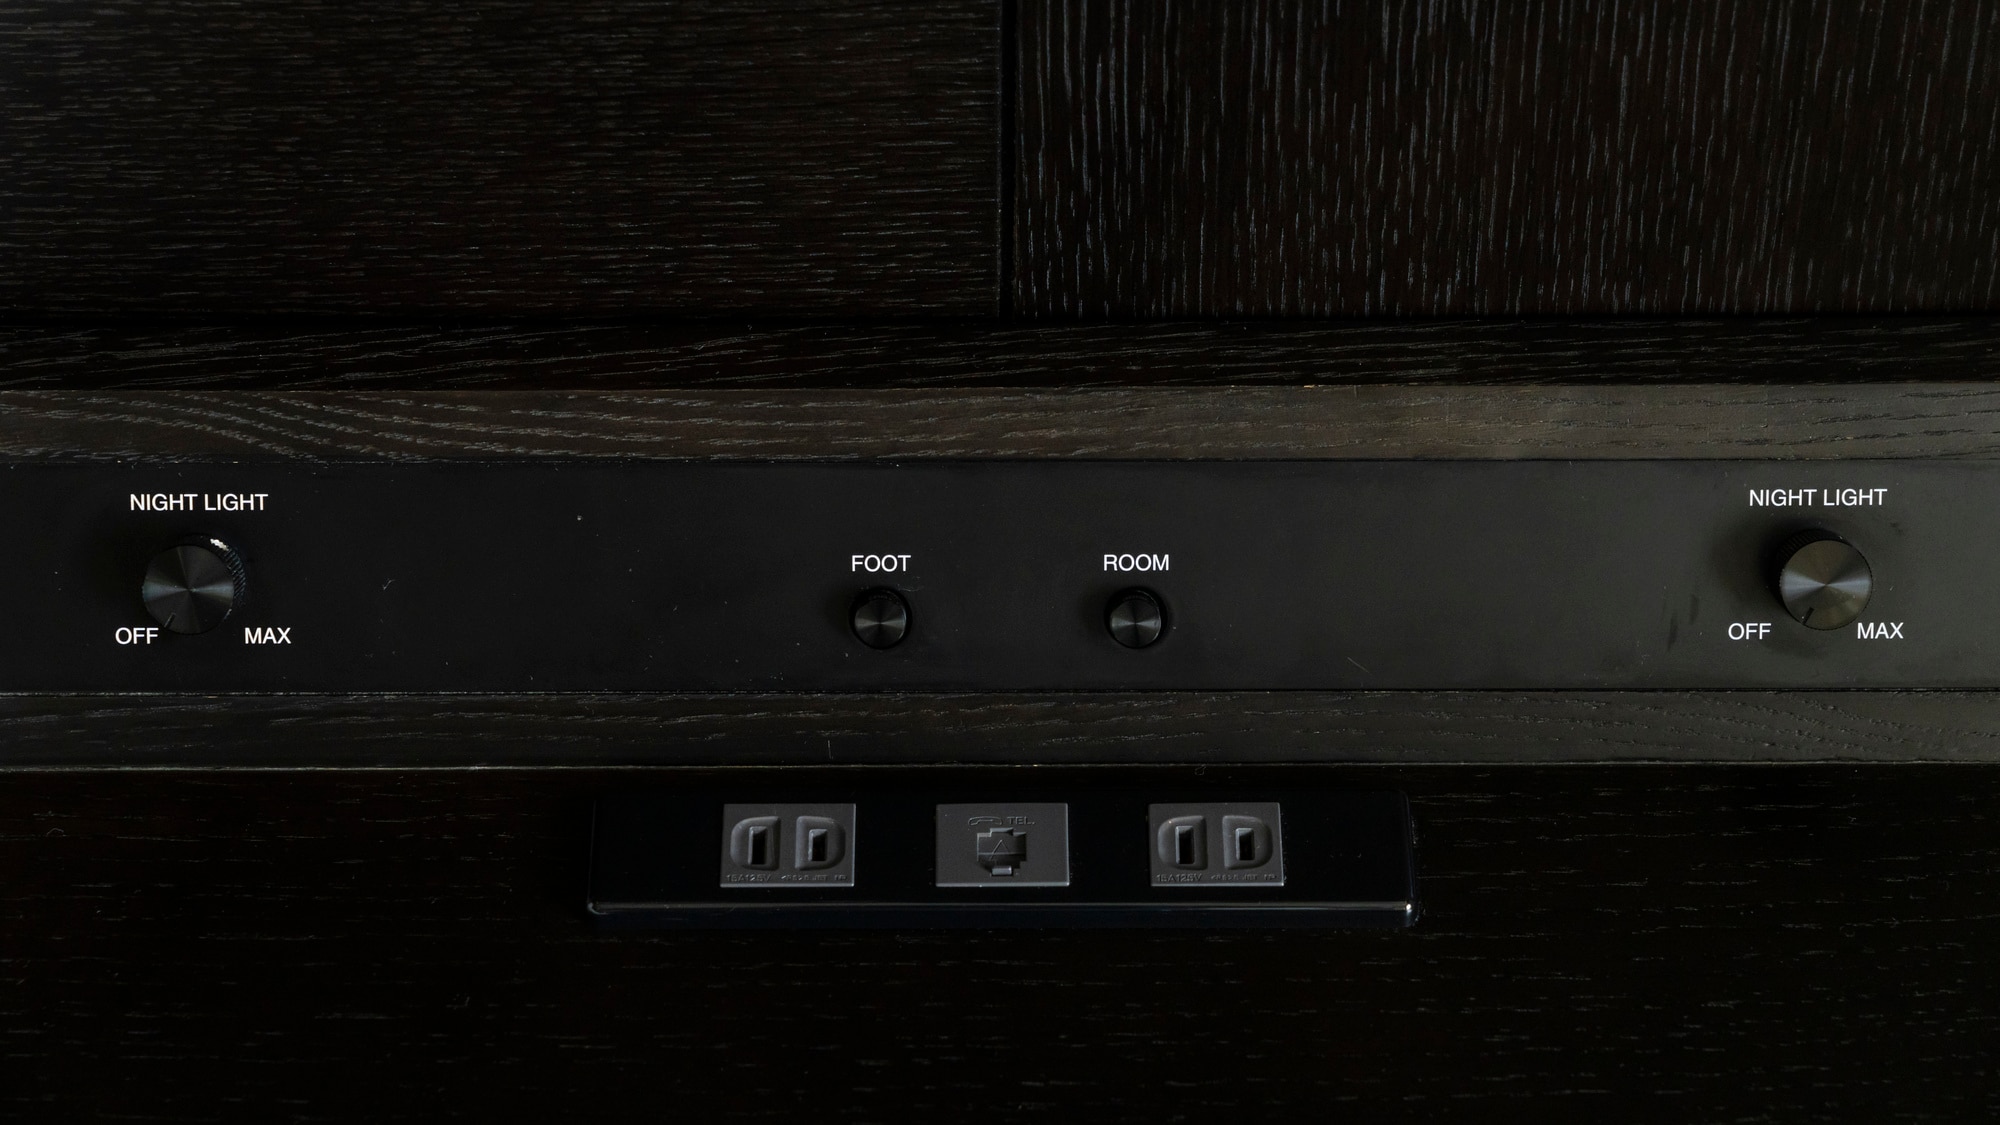 The bedside table is equipped with an outlet port (example)